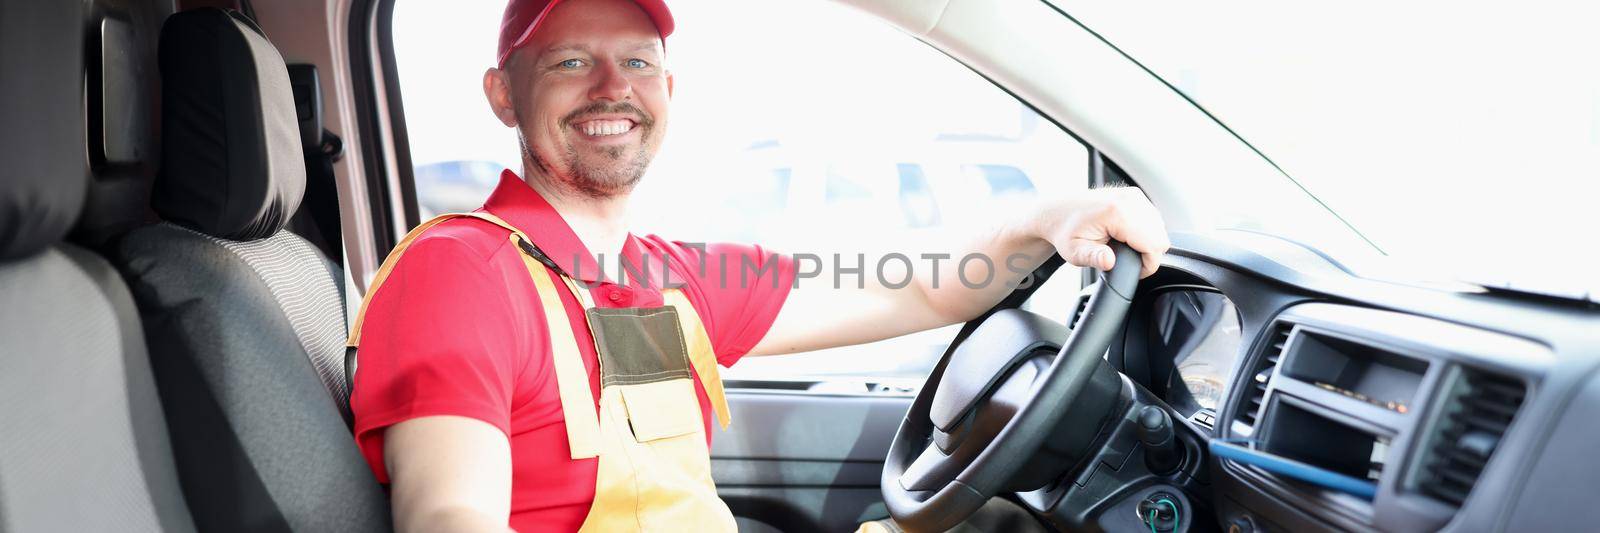 Unshaven male courier sitting in the car smiling, close-up. Deliveryman driver signs documents, shipment